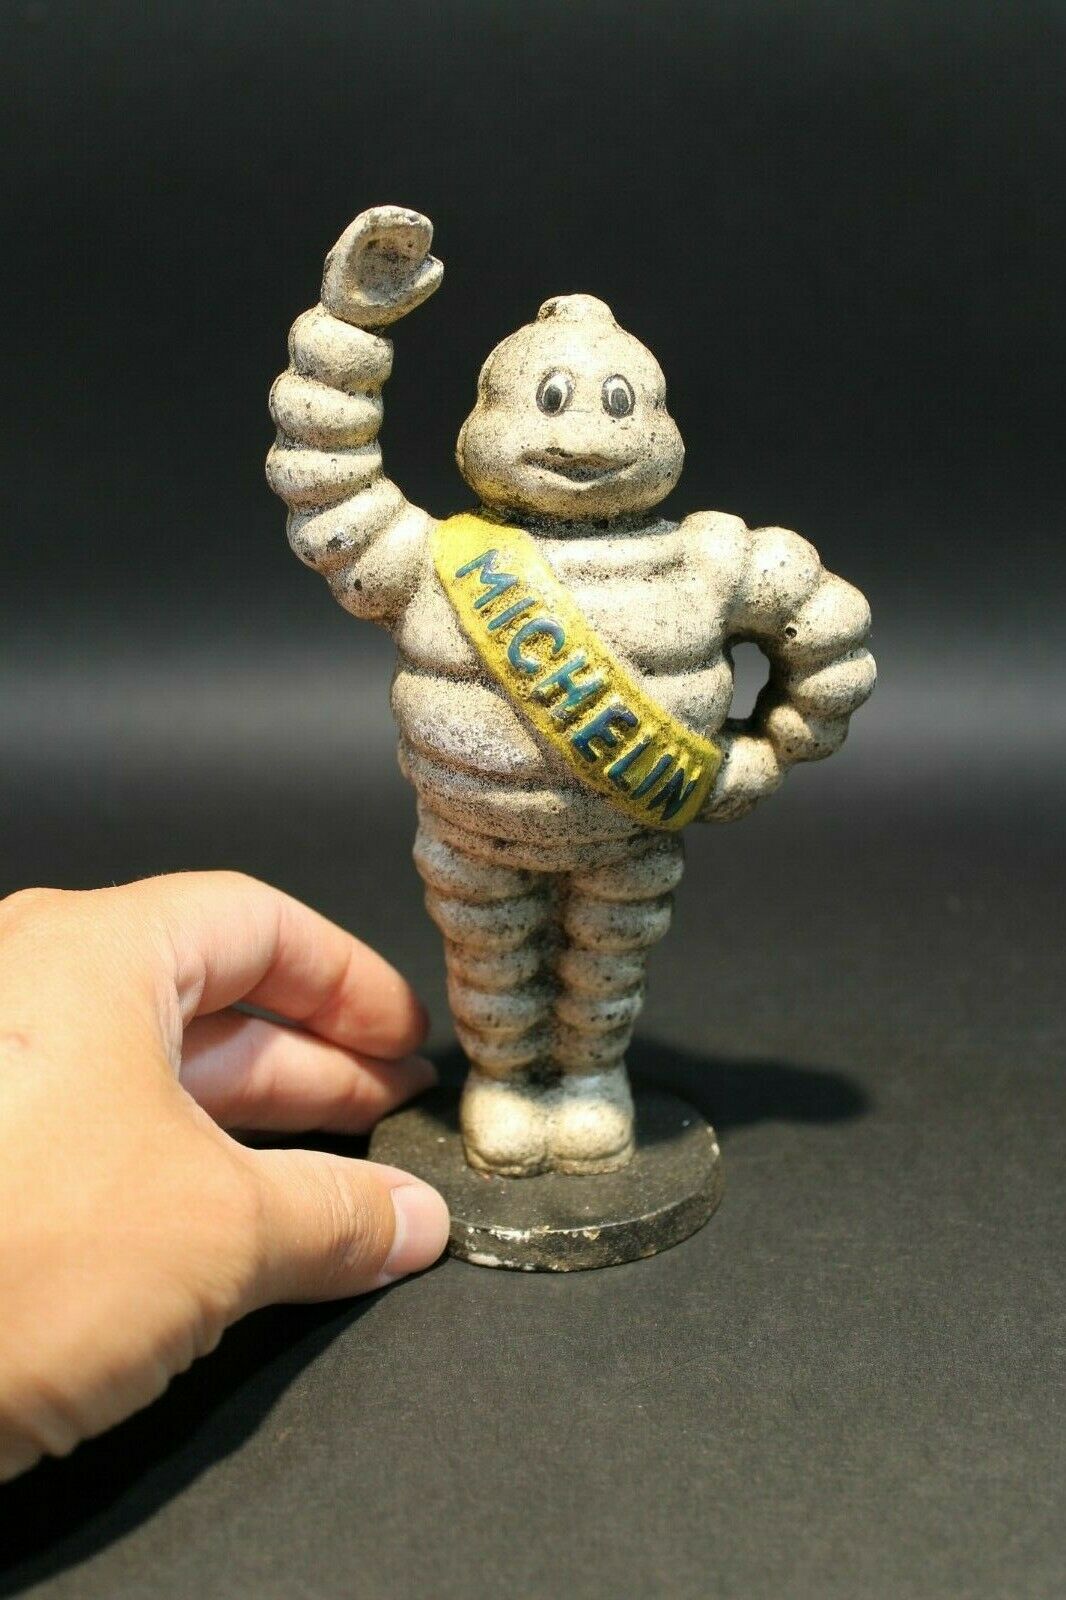 Vintage Style Cast Iron Coin Bank Tire Man - Early Home Decor